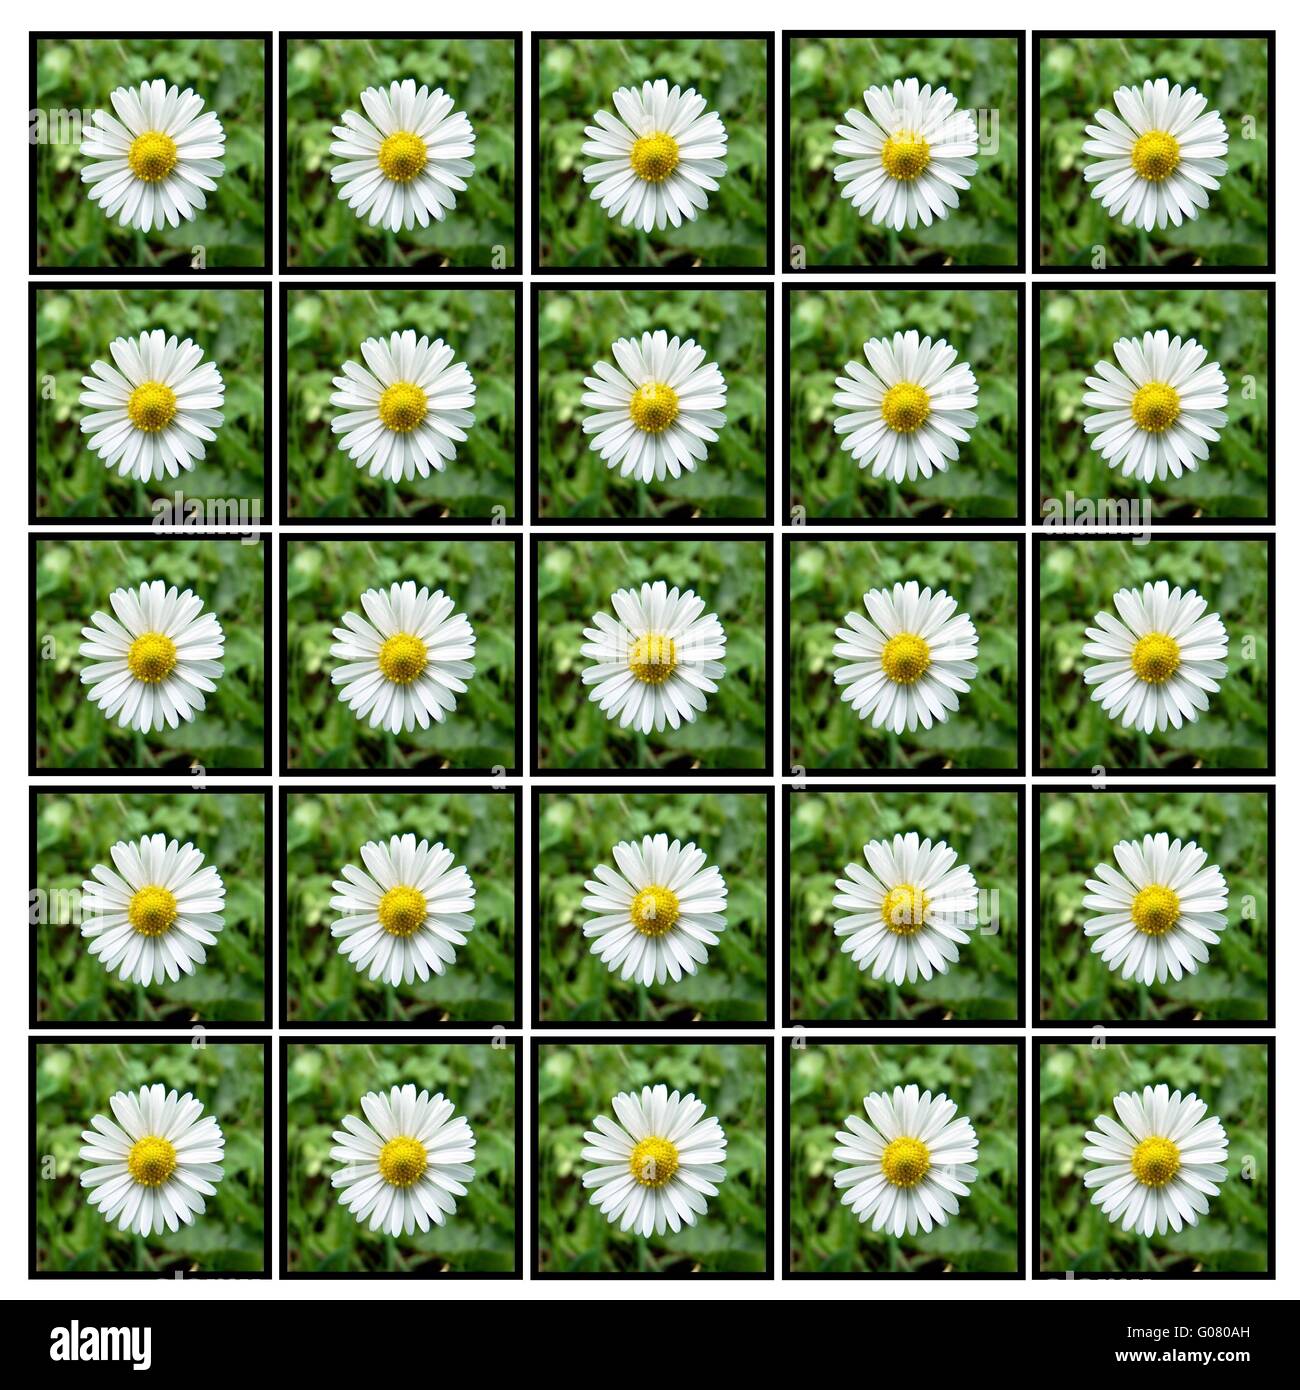 Daisy flowers background Banque D'Images